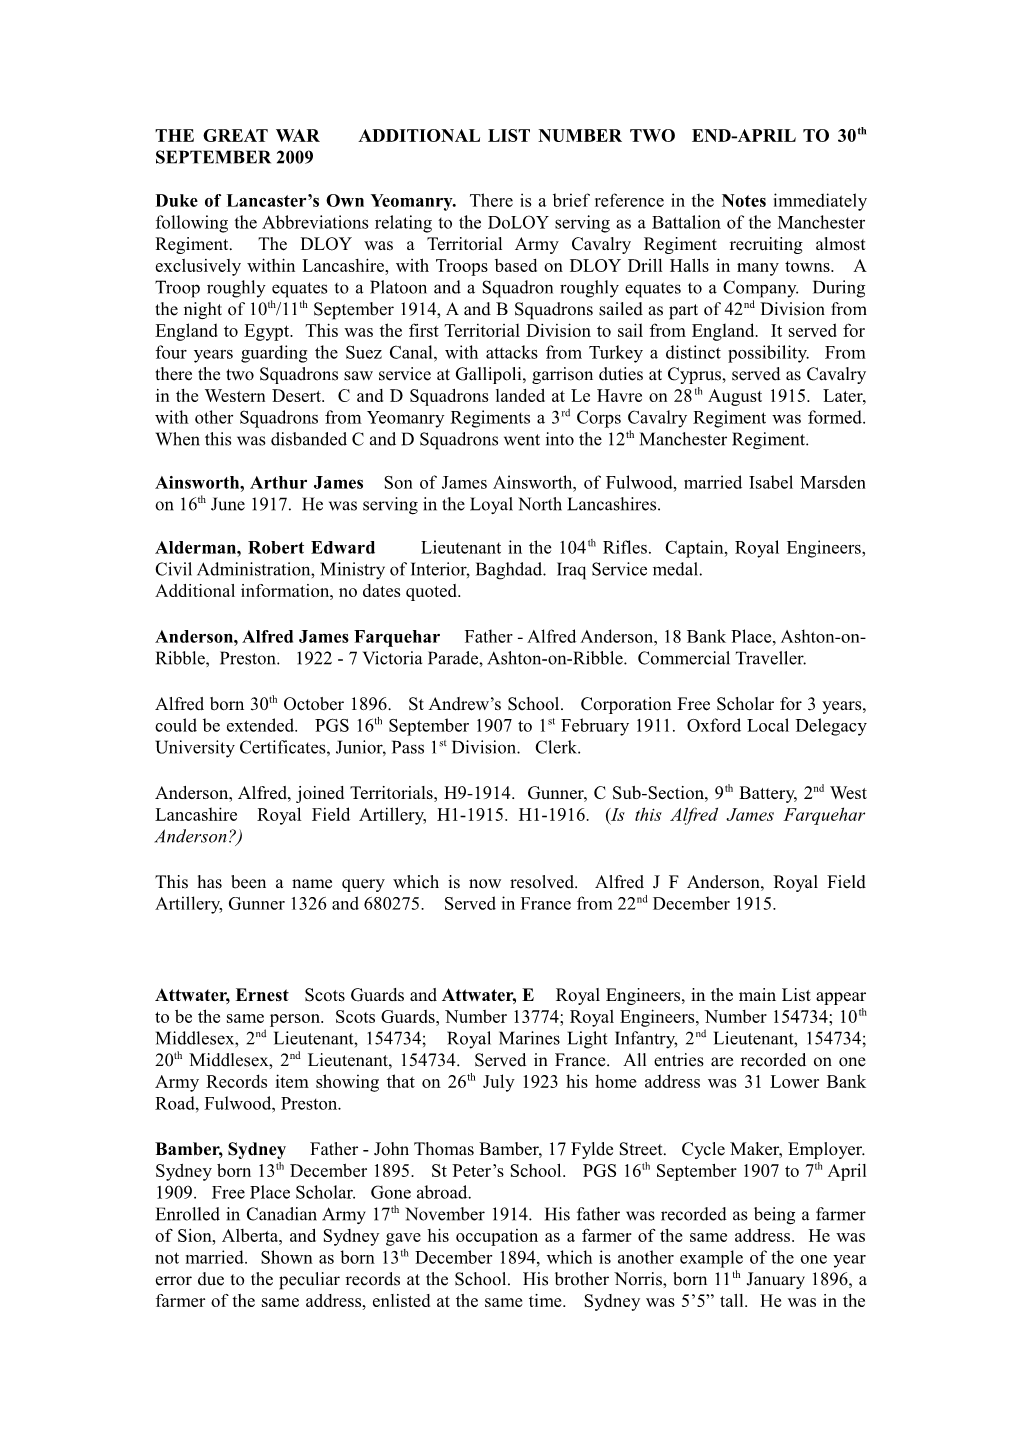 THE GREAT WAR ADDITIONAL LIST NUMBER TWO END-APRIL to 30Th SEPTEMBER 2009